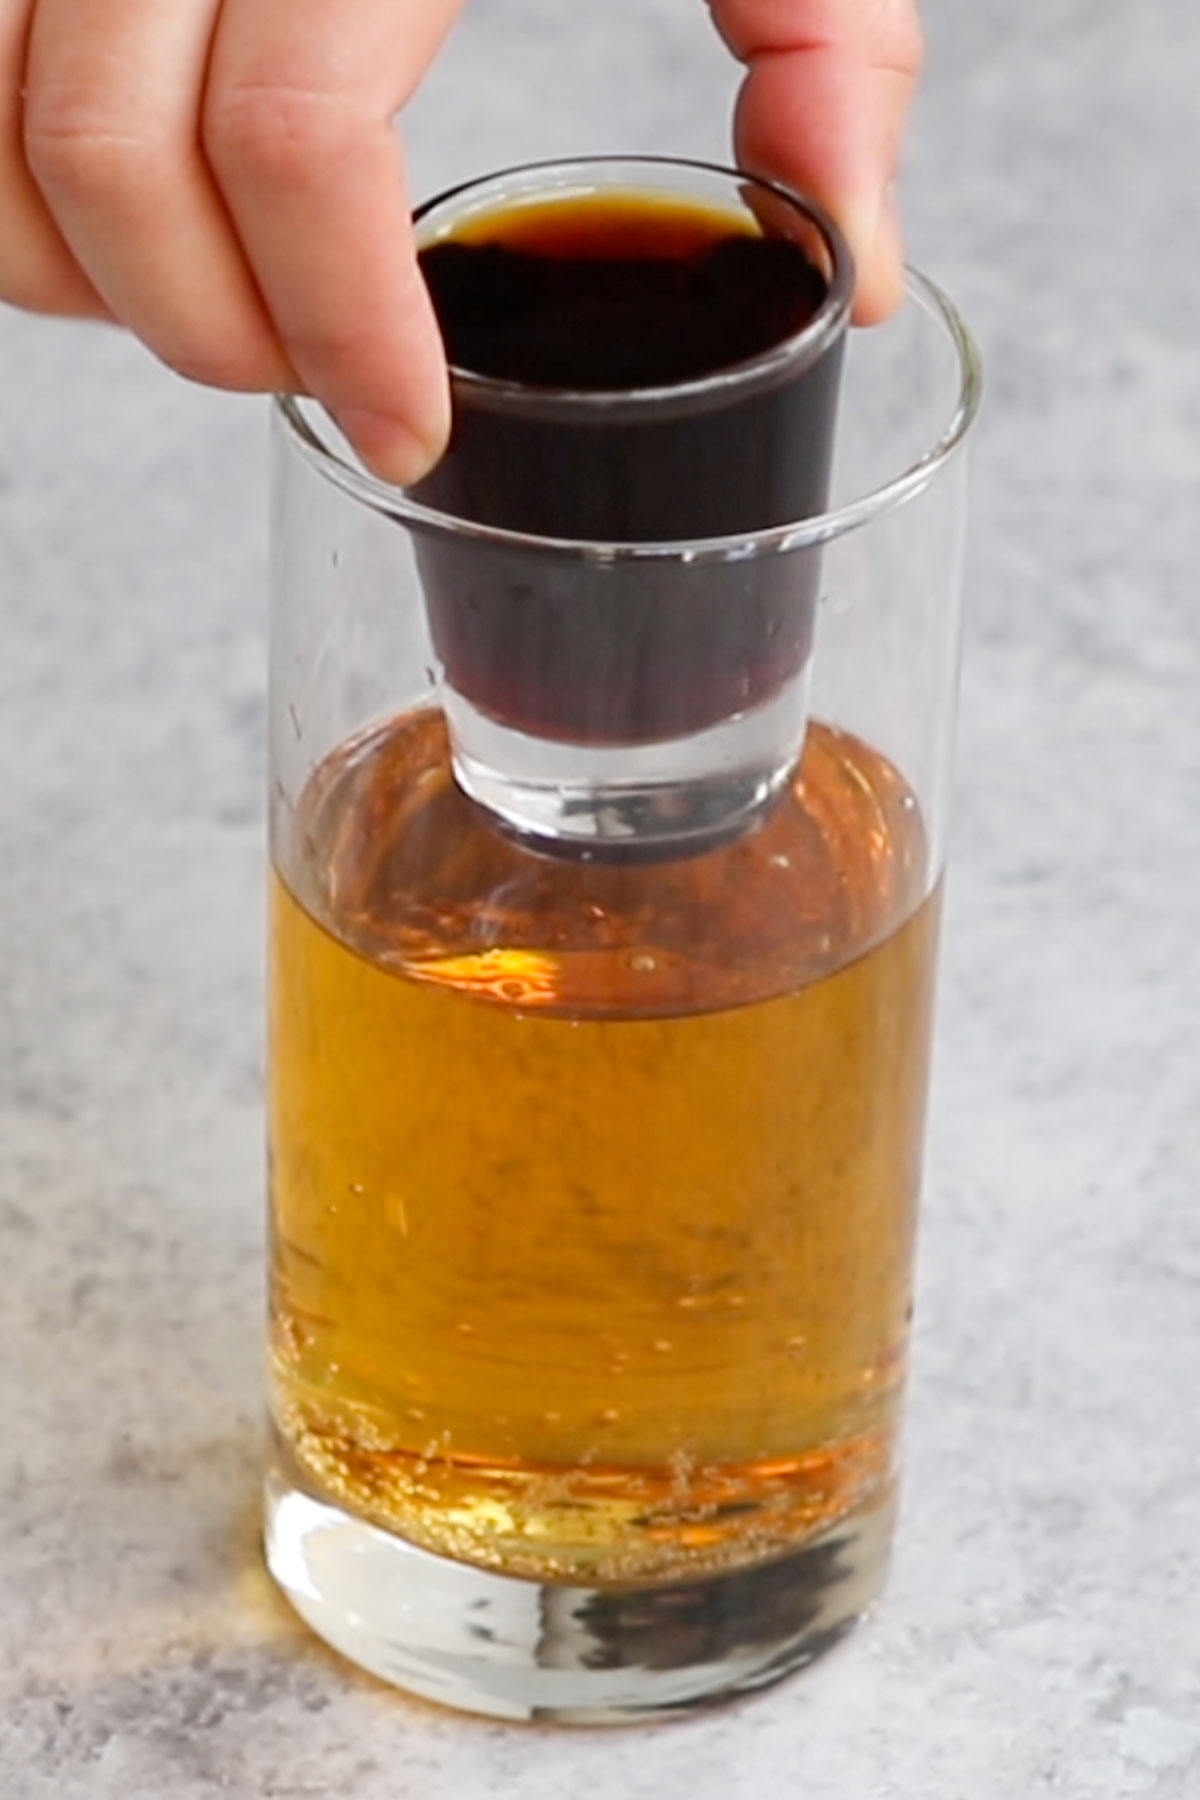 Jager Bomb or Jägerbomb is a simple cocktail that takes 3 minutes to make, but don’t underestimate its ability to get a party started! Every bartender knows this popular drink and it has only 2 ingredients – Jägermeister shot and Red Bull energy drink. 